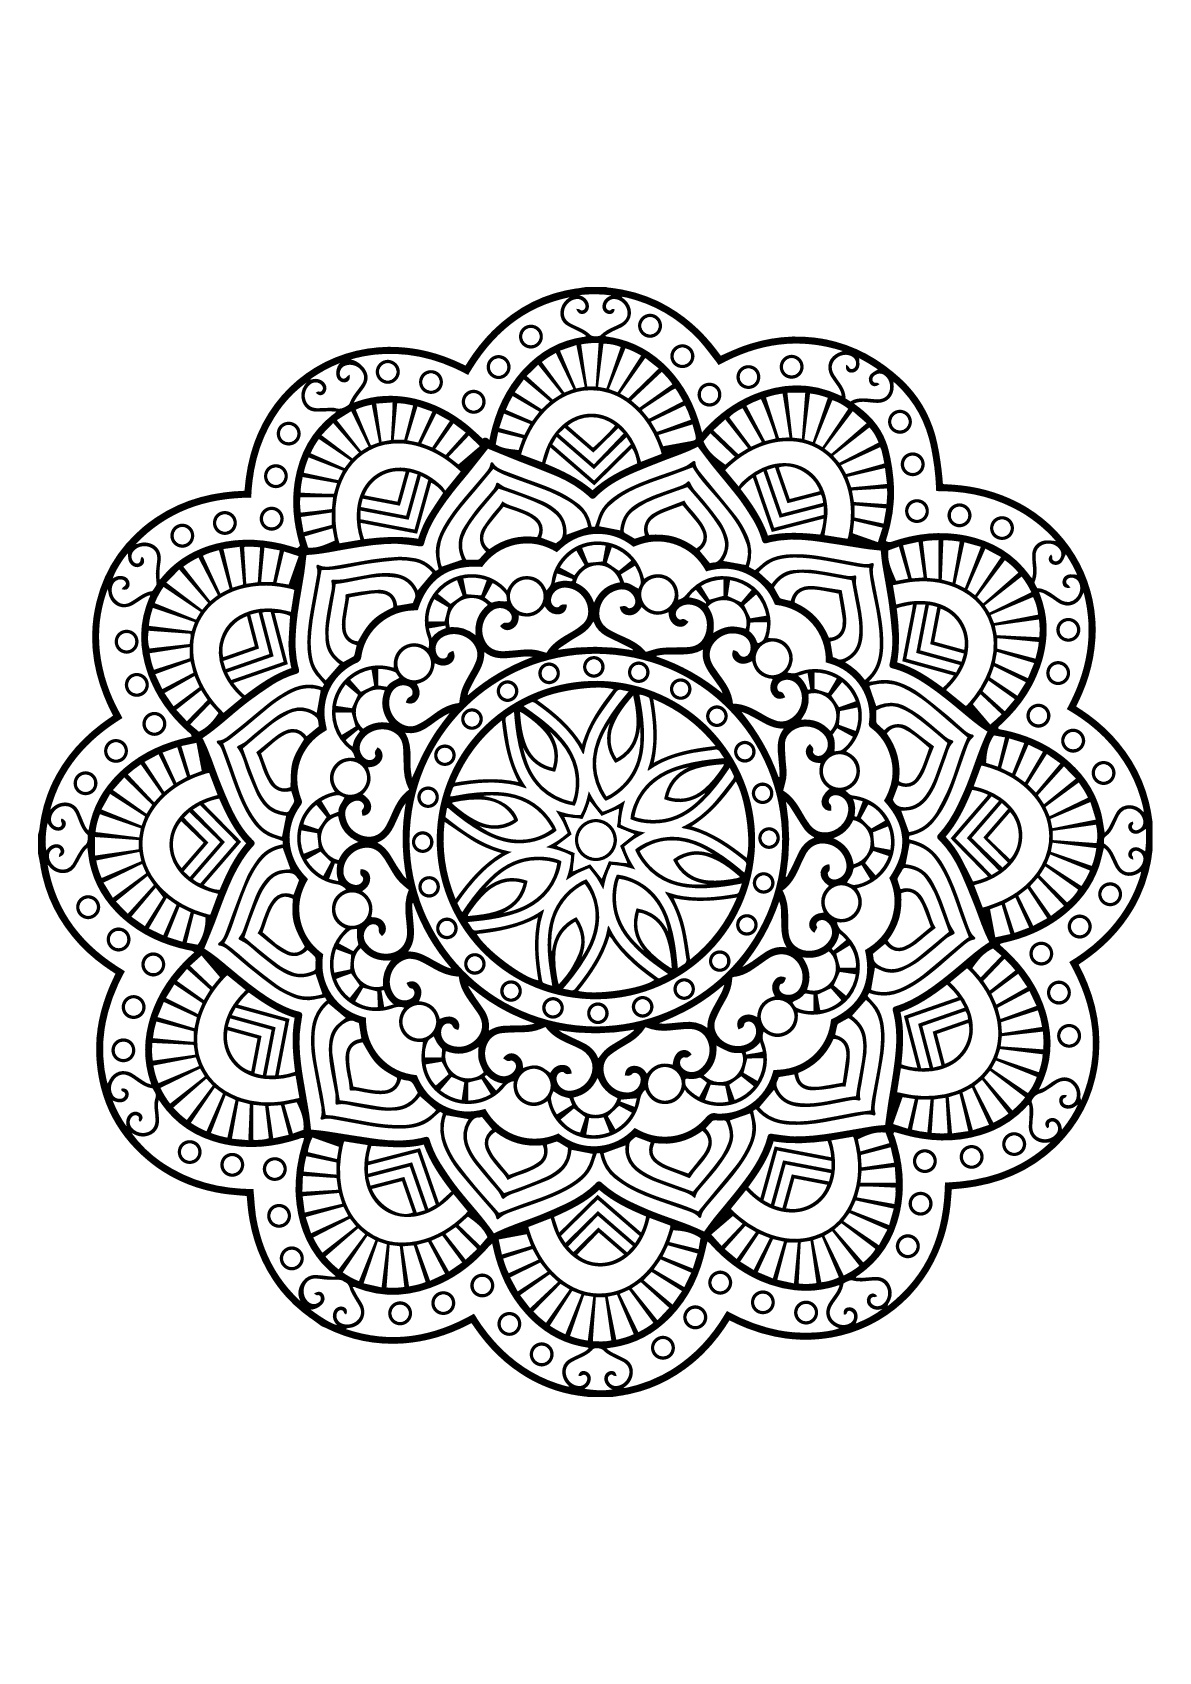 Download Mandala From Free Coloring Books For Adults 26 Mandalas Adult Coloring Pages